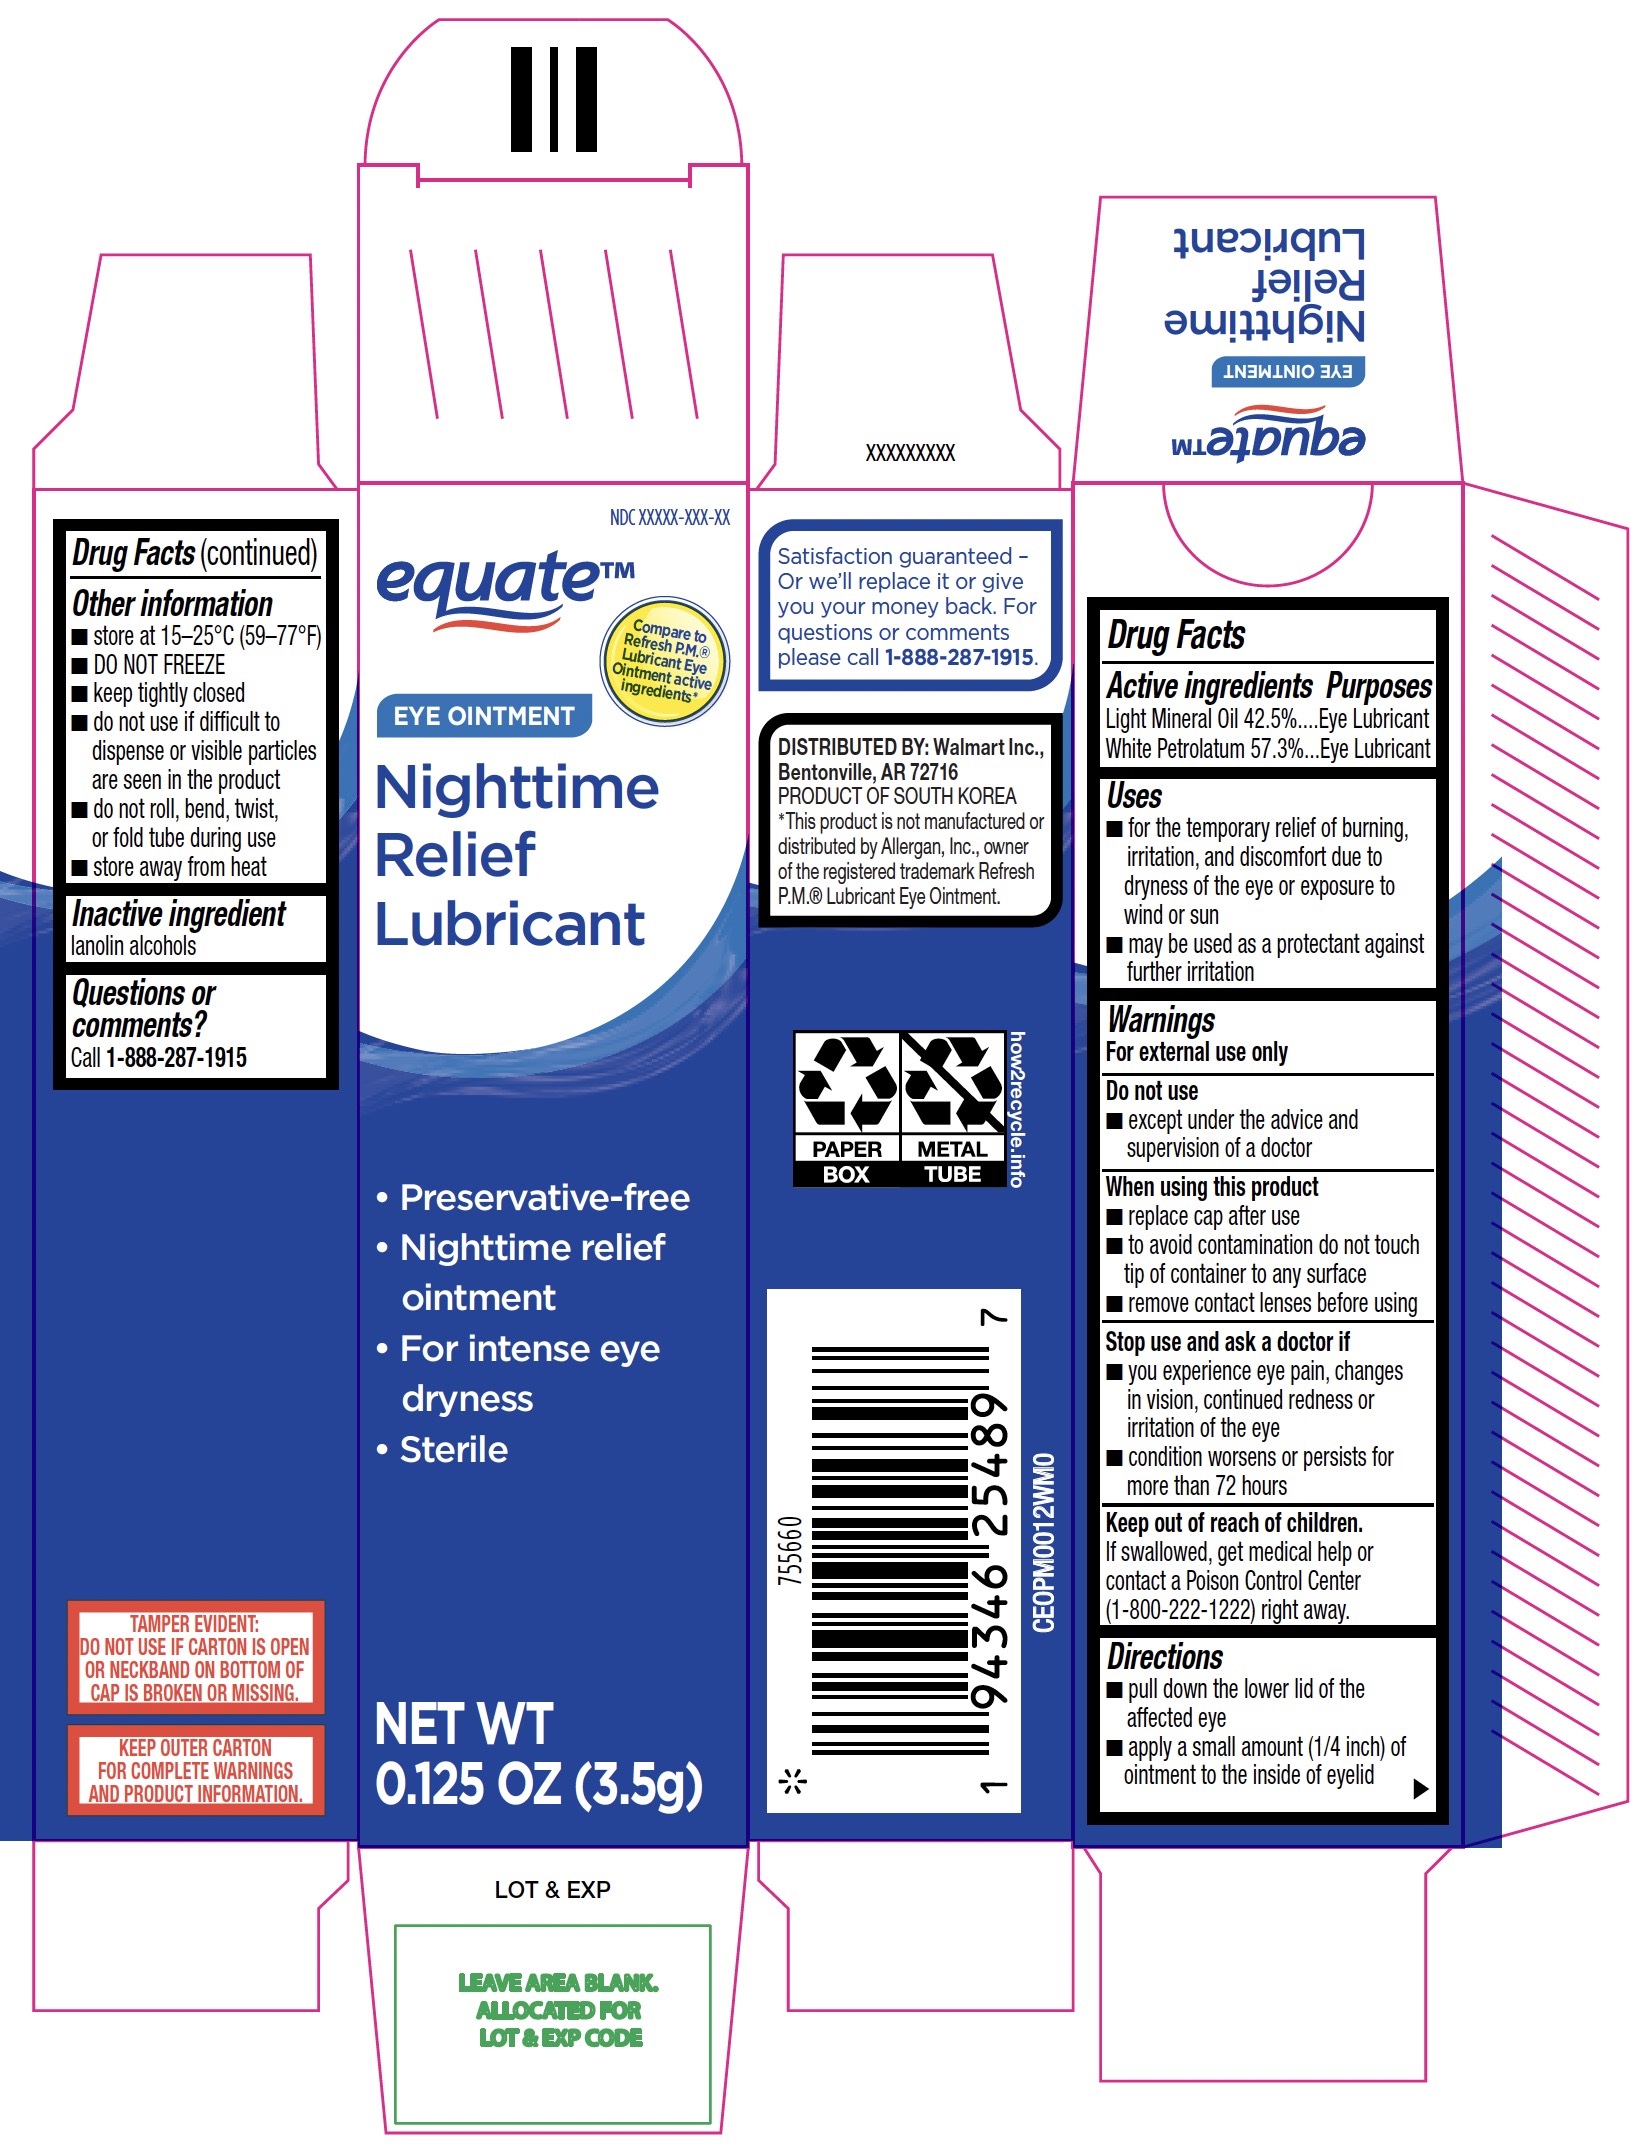 Equate Eye Ointment Nighttime Relief Lubricant 3.5g